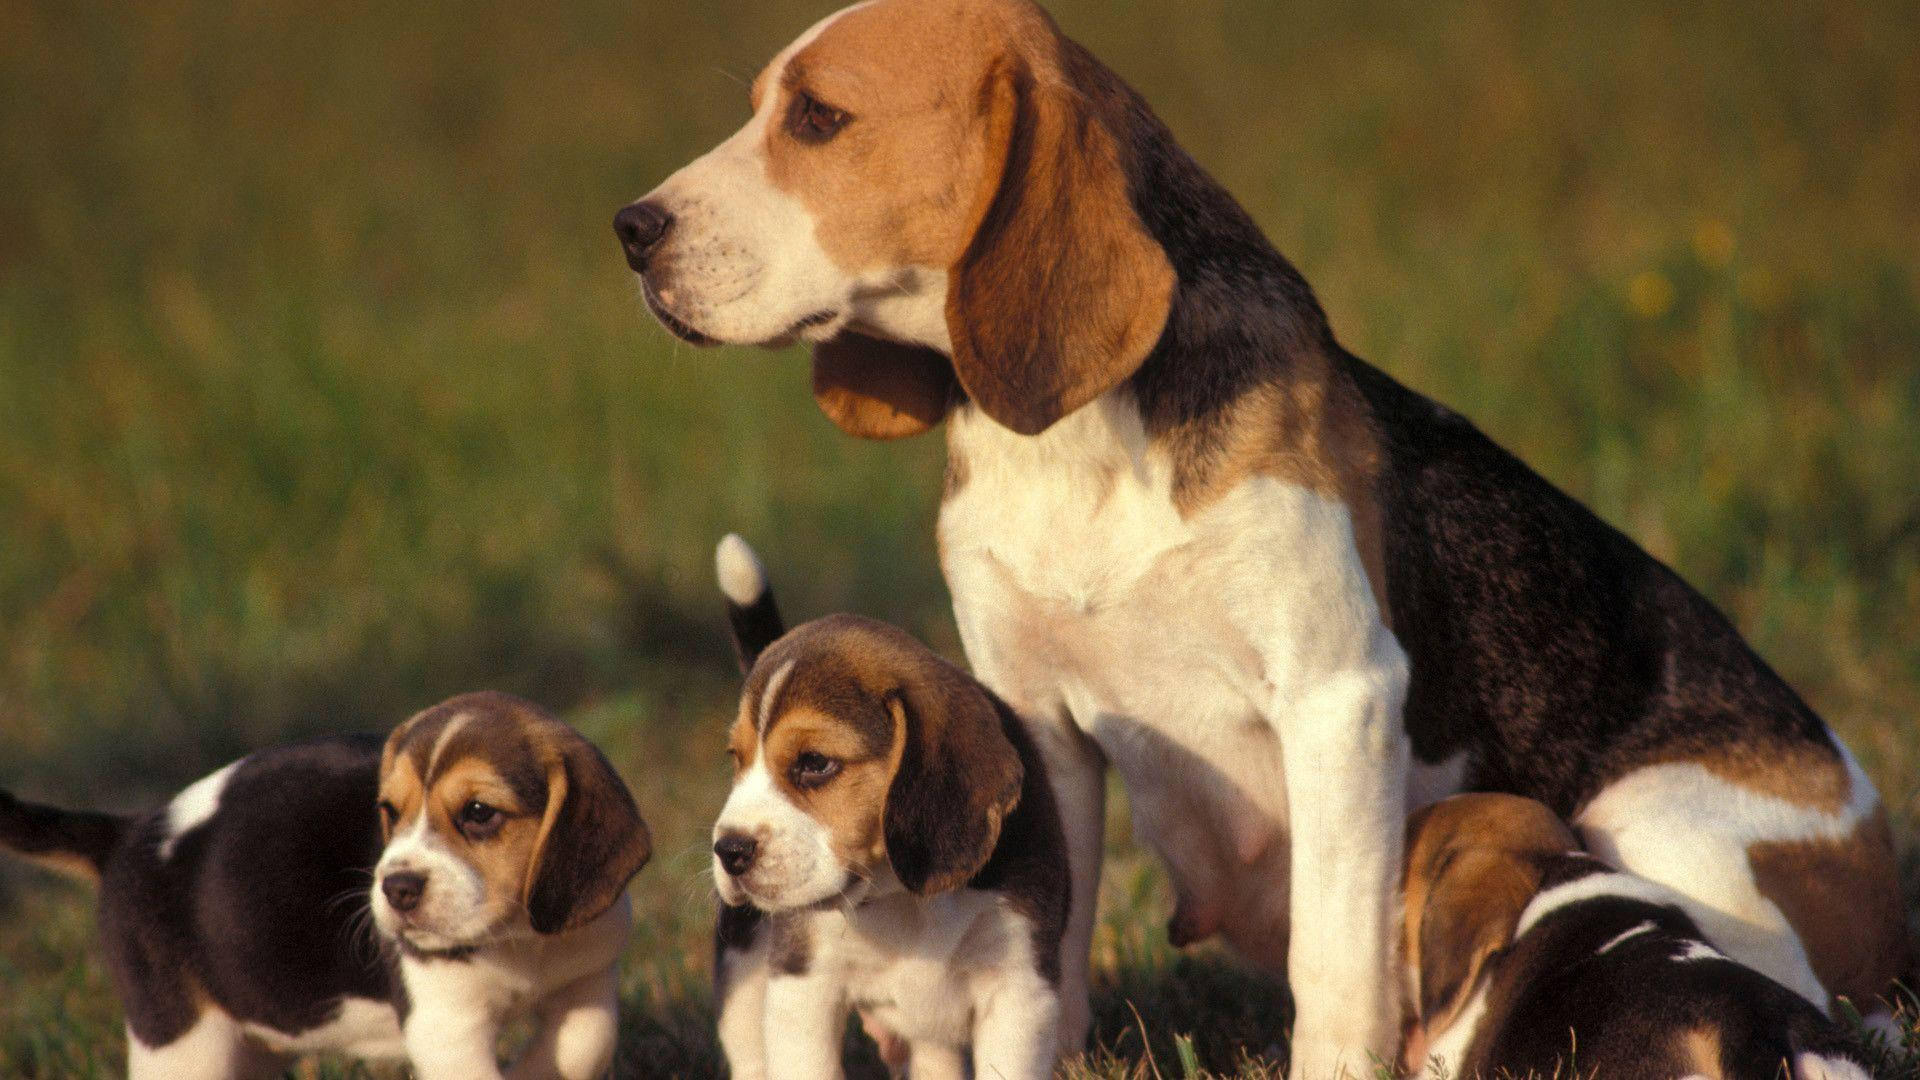 Free Beagle Wallpaper Downloads, [100+] Beagle Wallpapers for FREE |  